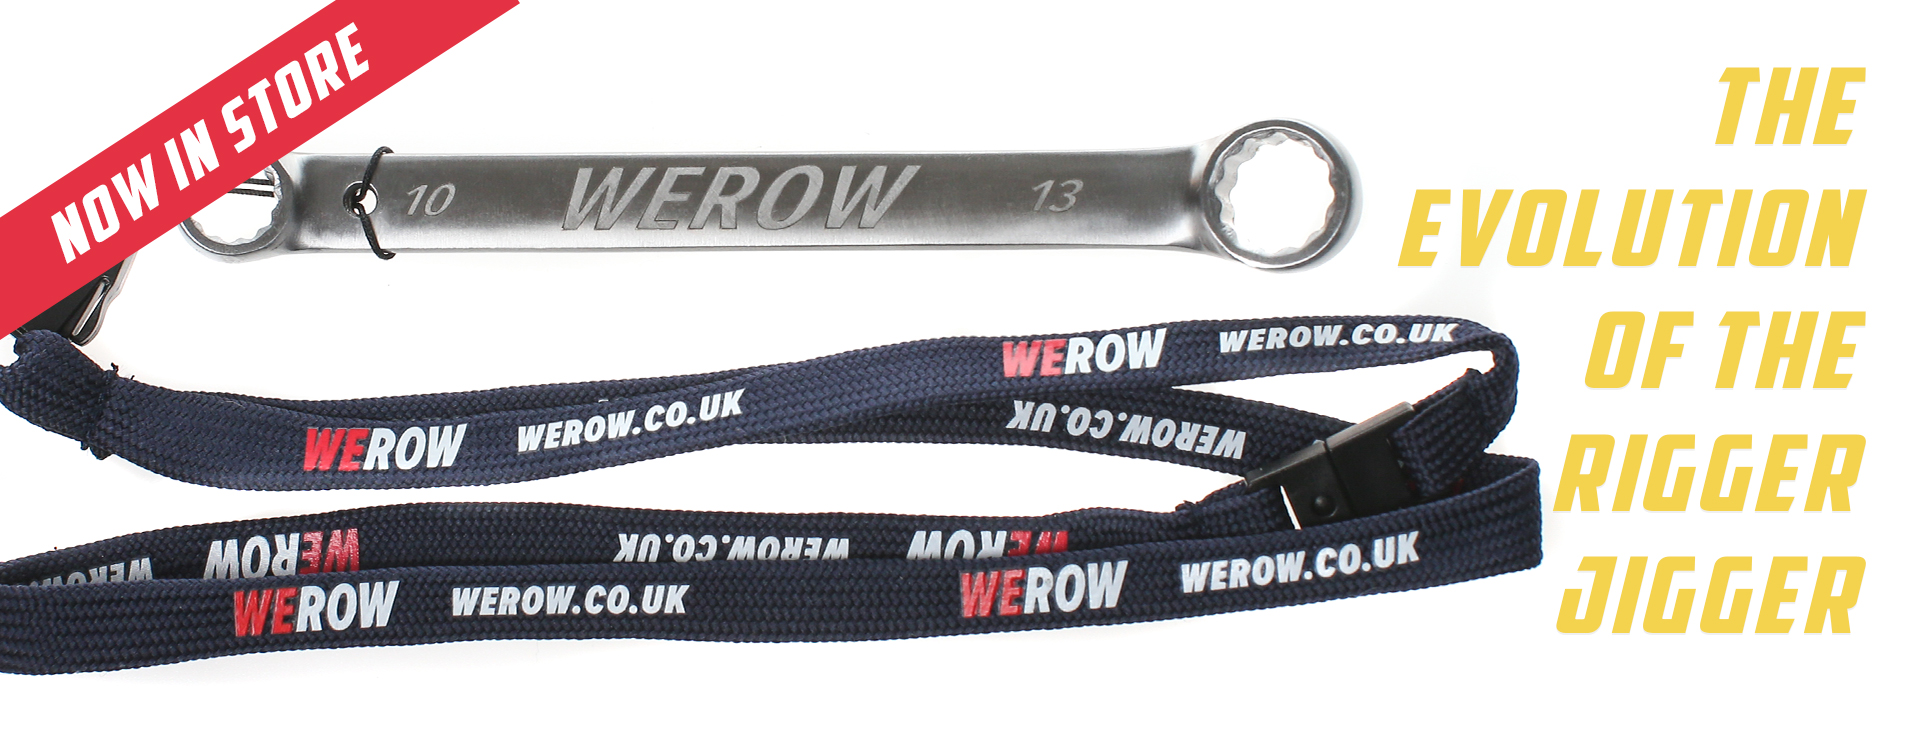 Gifts for rowers from the WEROW Store